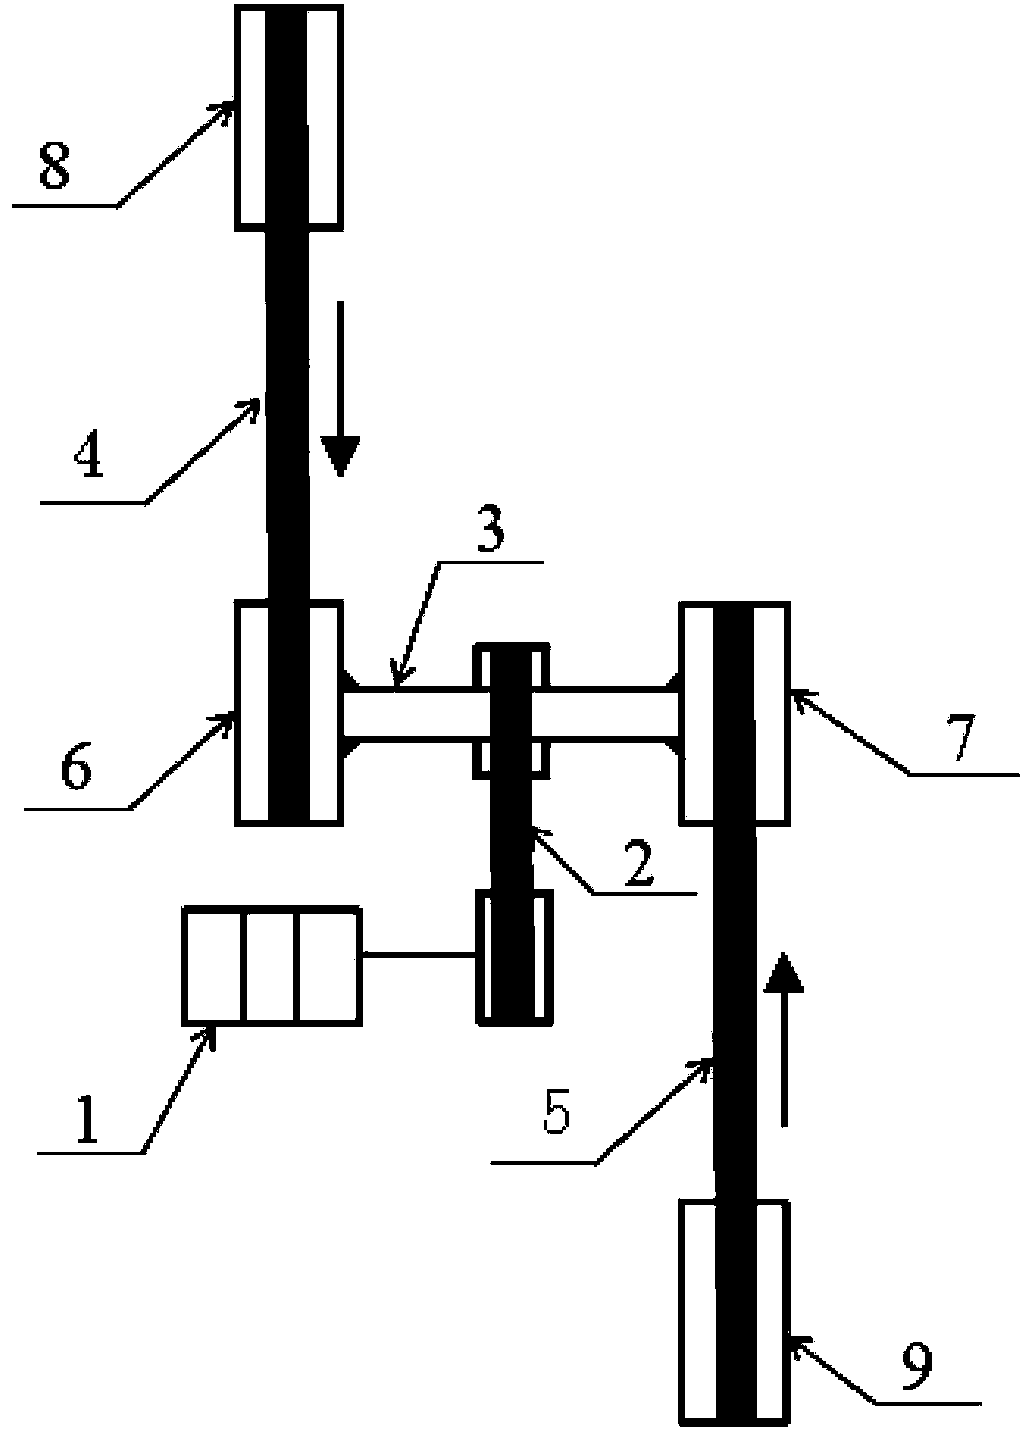 Escalator based on a potential energy transformation single drive mechanism